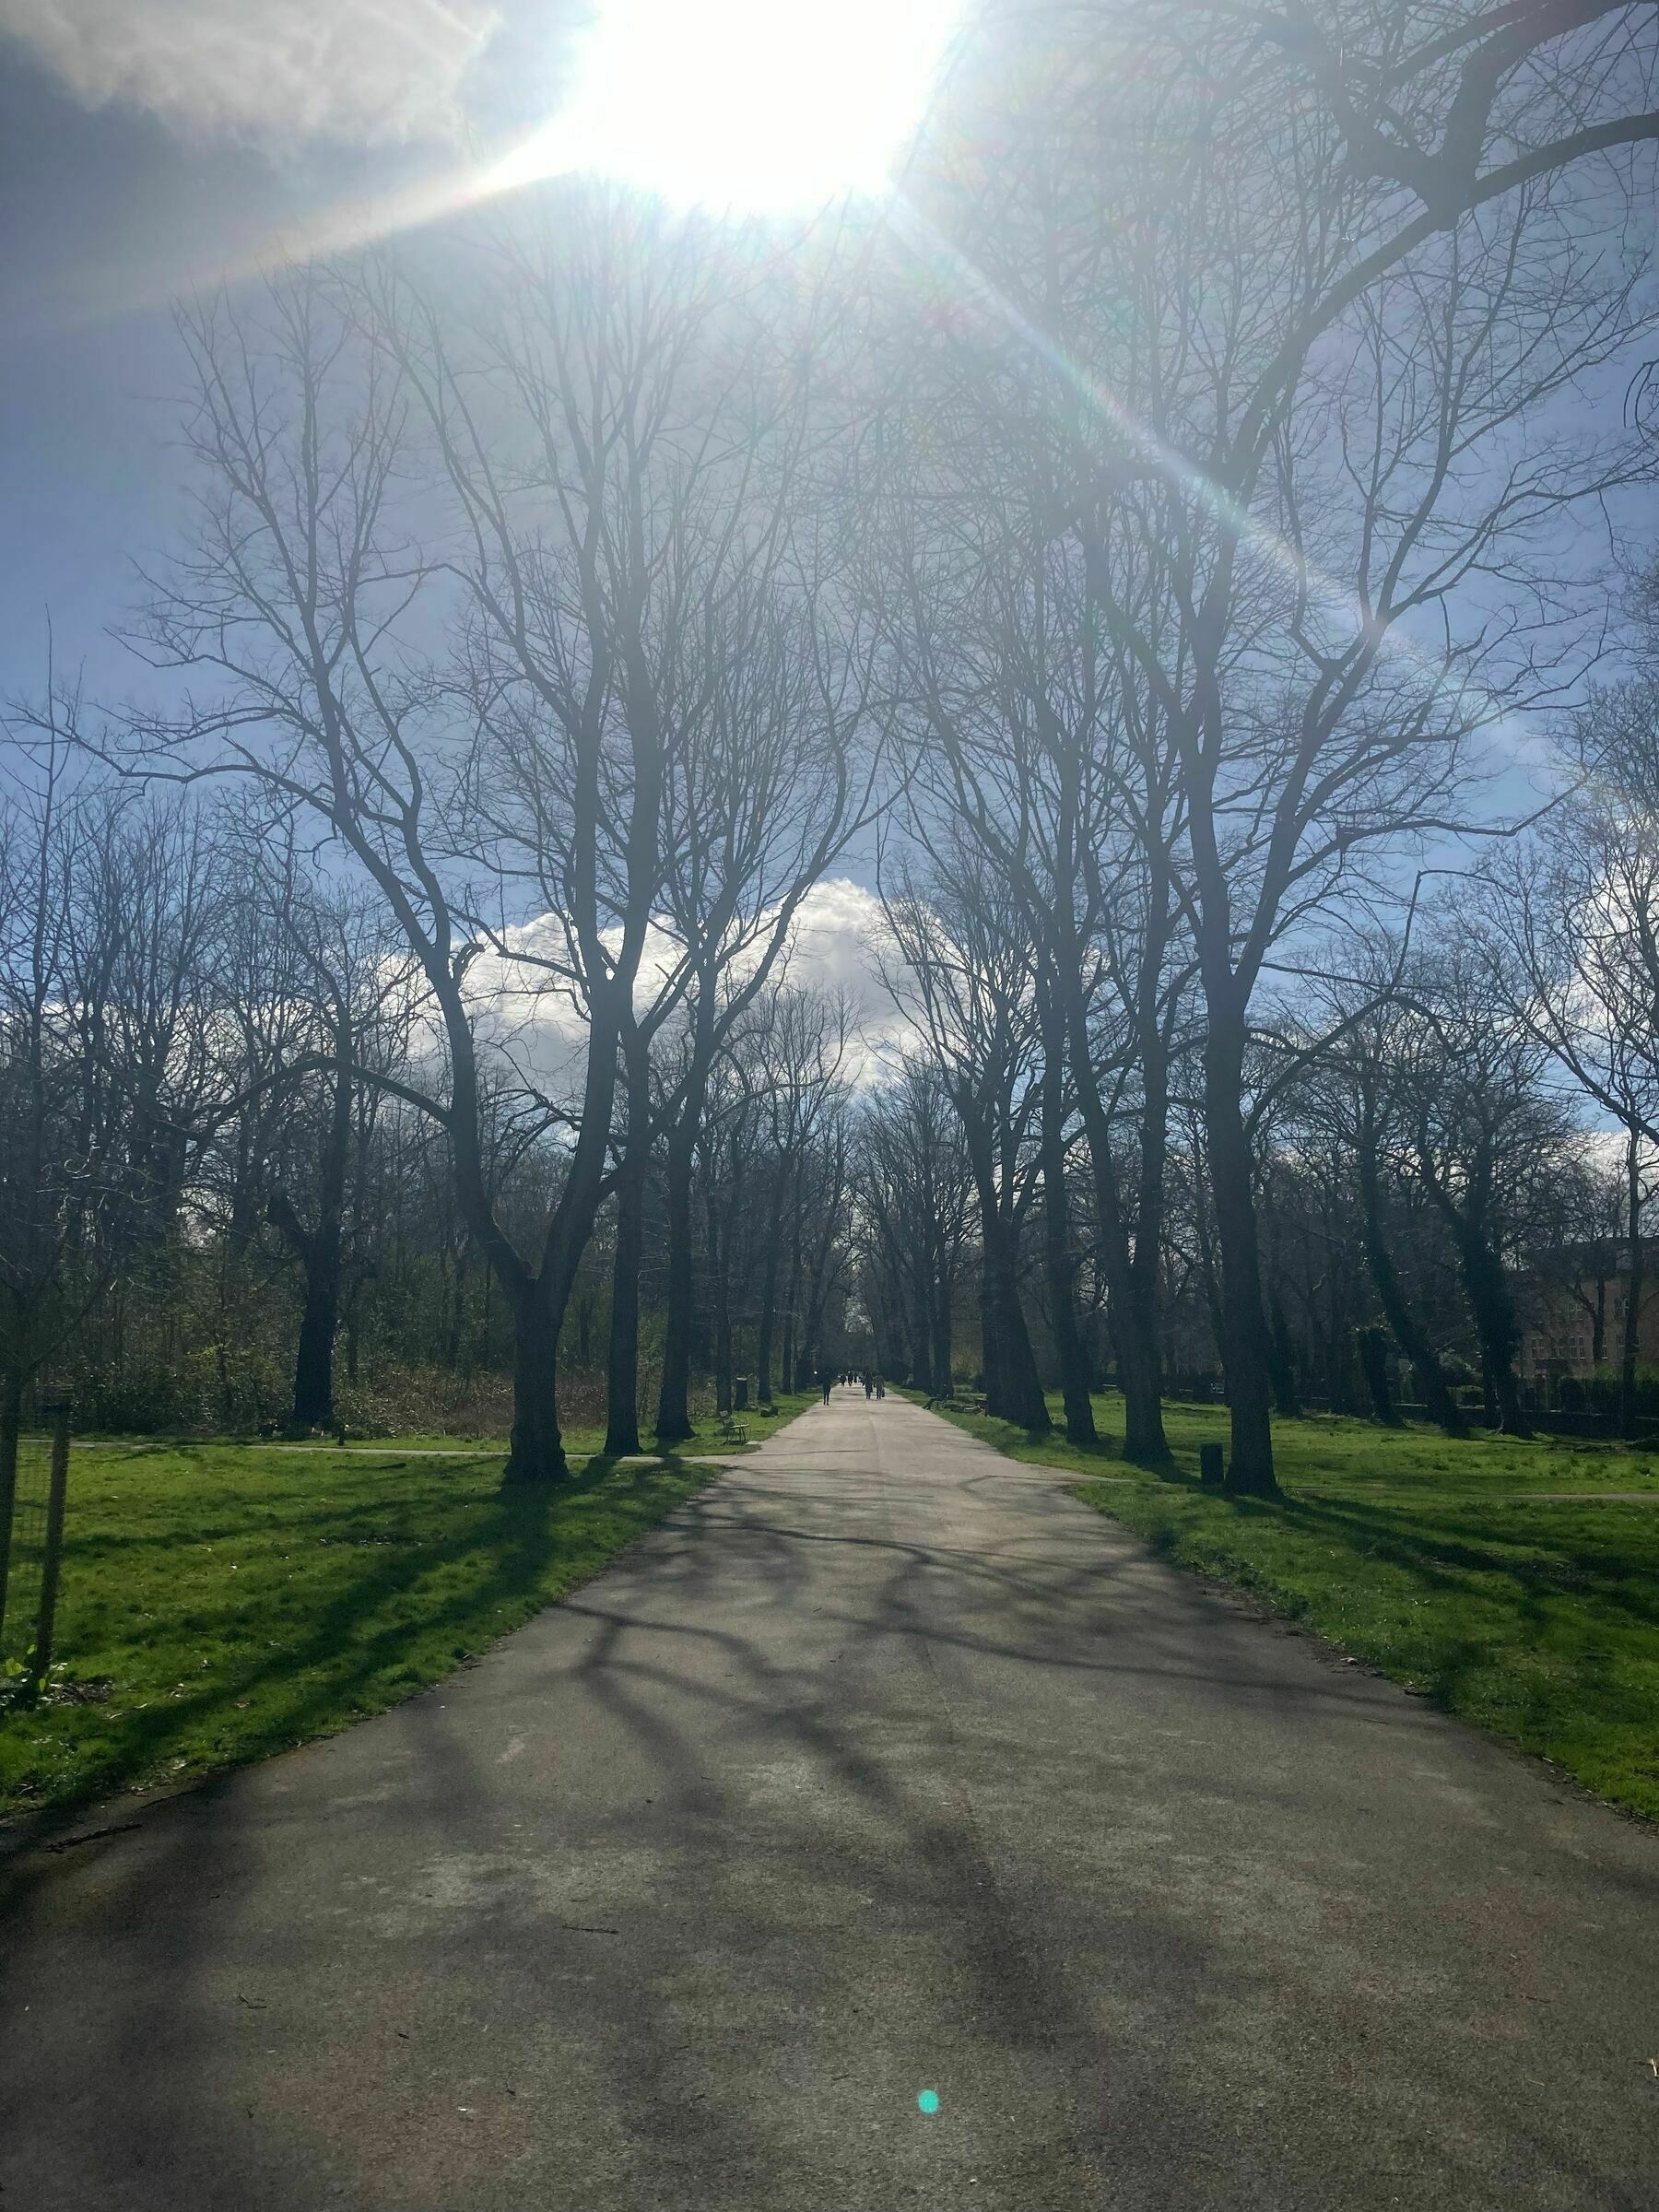 An avenue of still bare trees with a bright midday sun in a blue sky casting shadows of the trees on the path. 